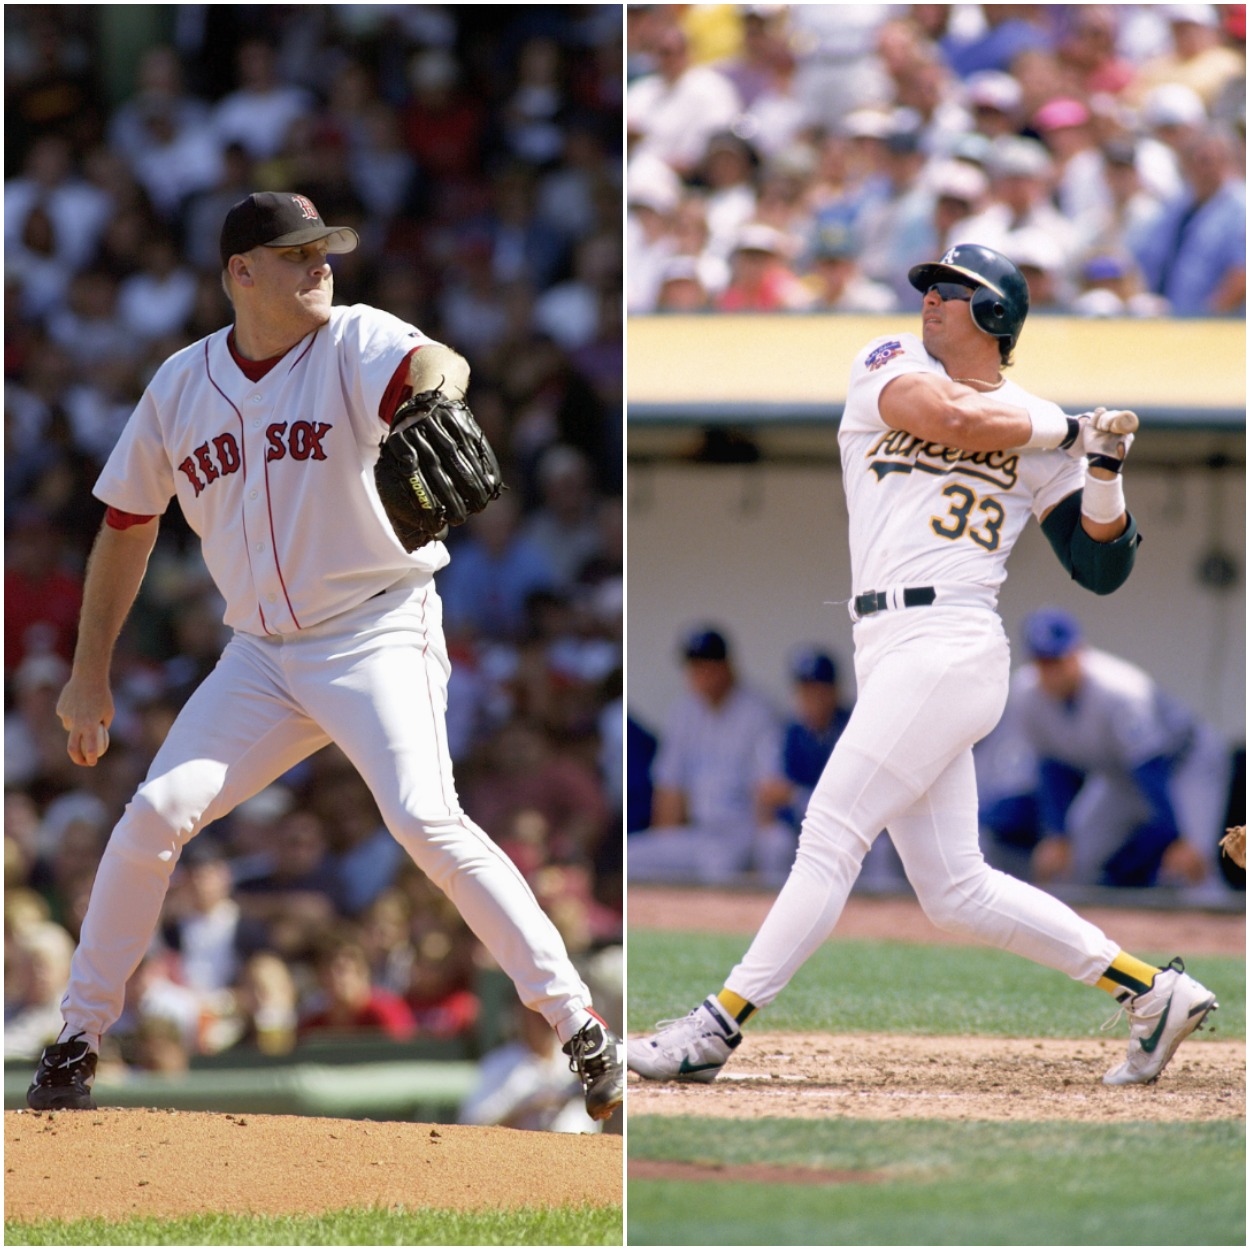 Curt Schilling and Jose Canseco